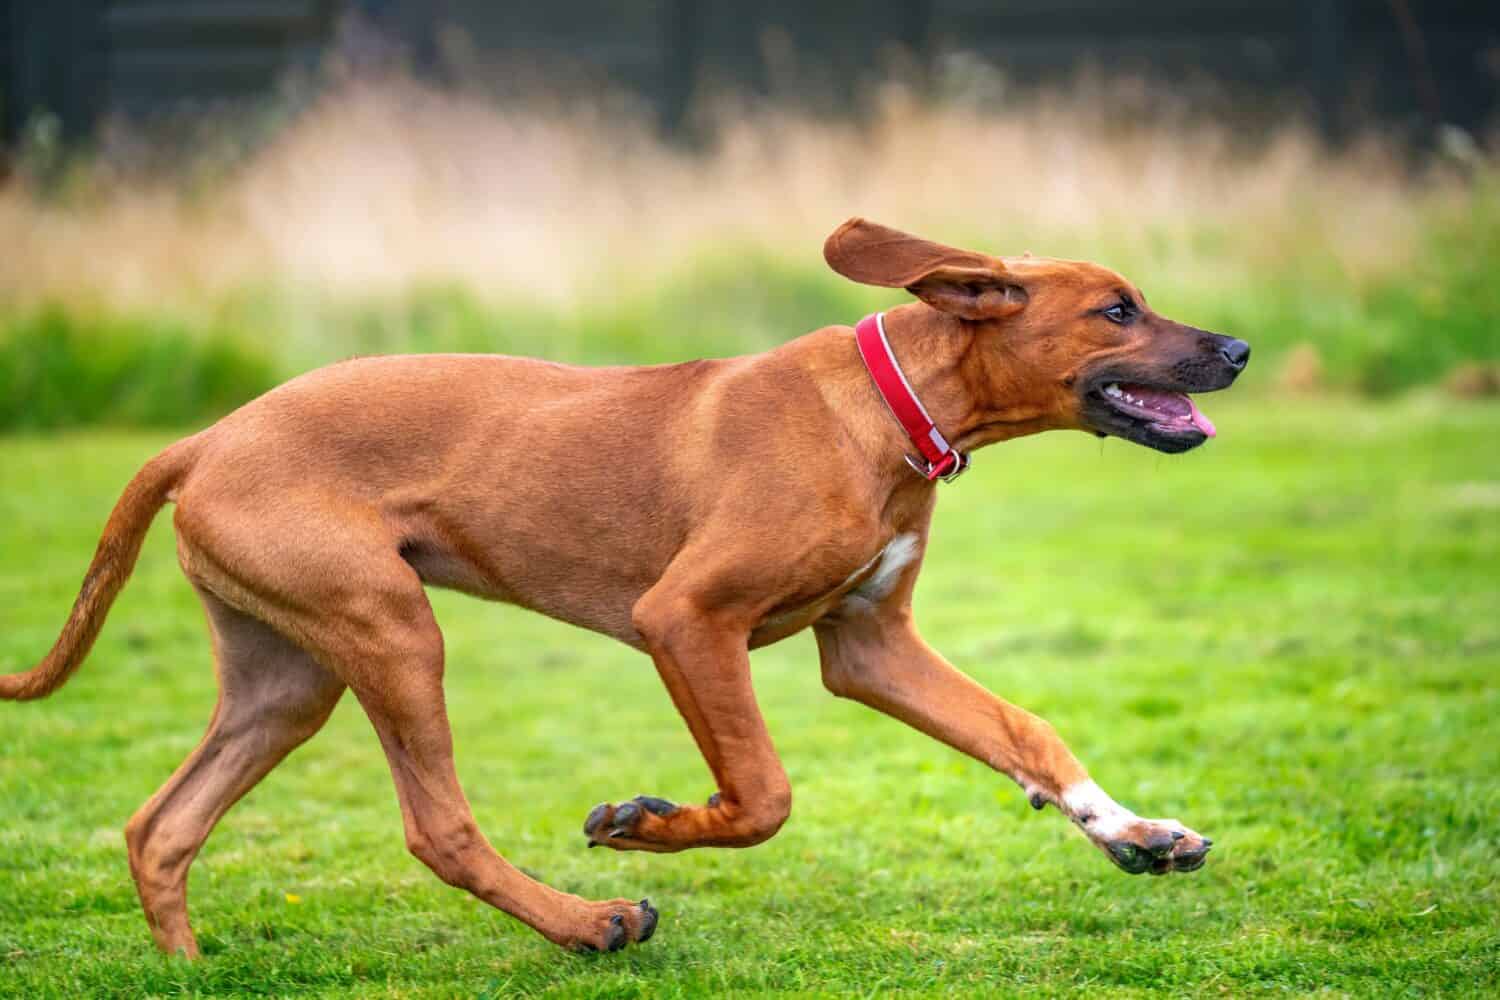 Six month old Rhodesian Ridegback puppy. This puppy is light fawn in colour and running from the left to the right.